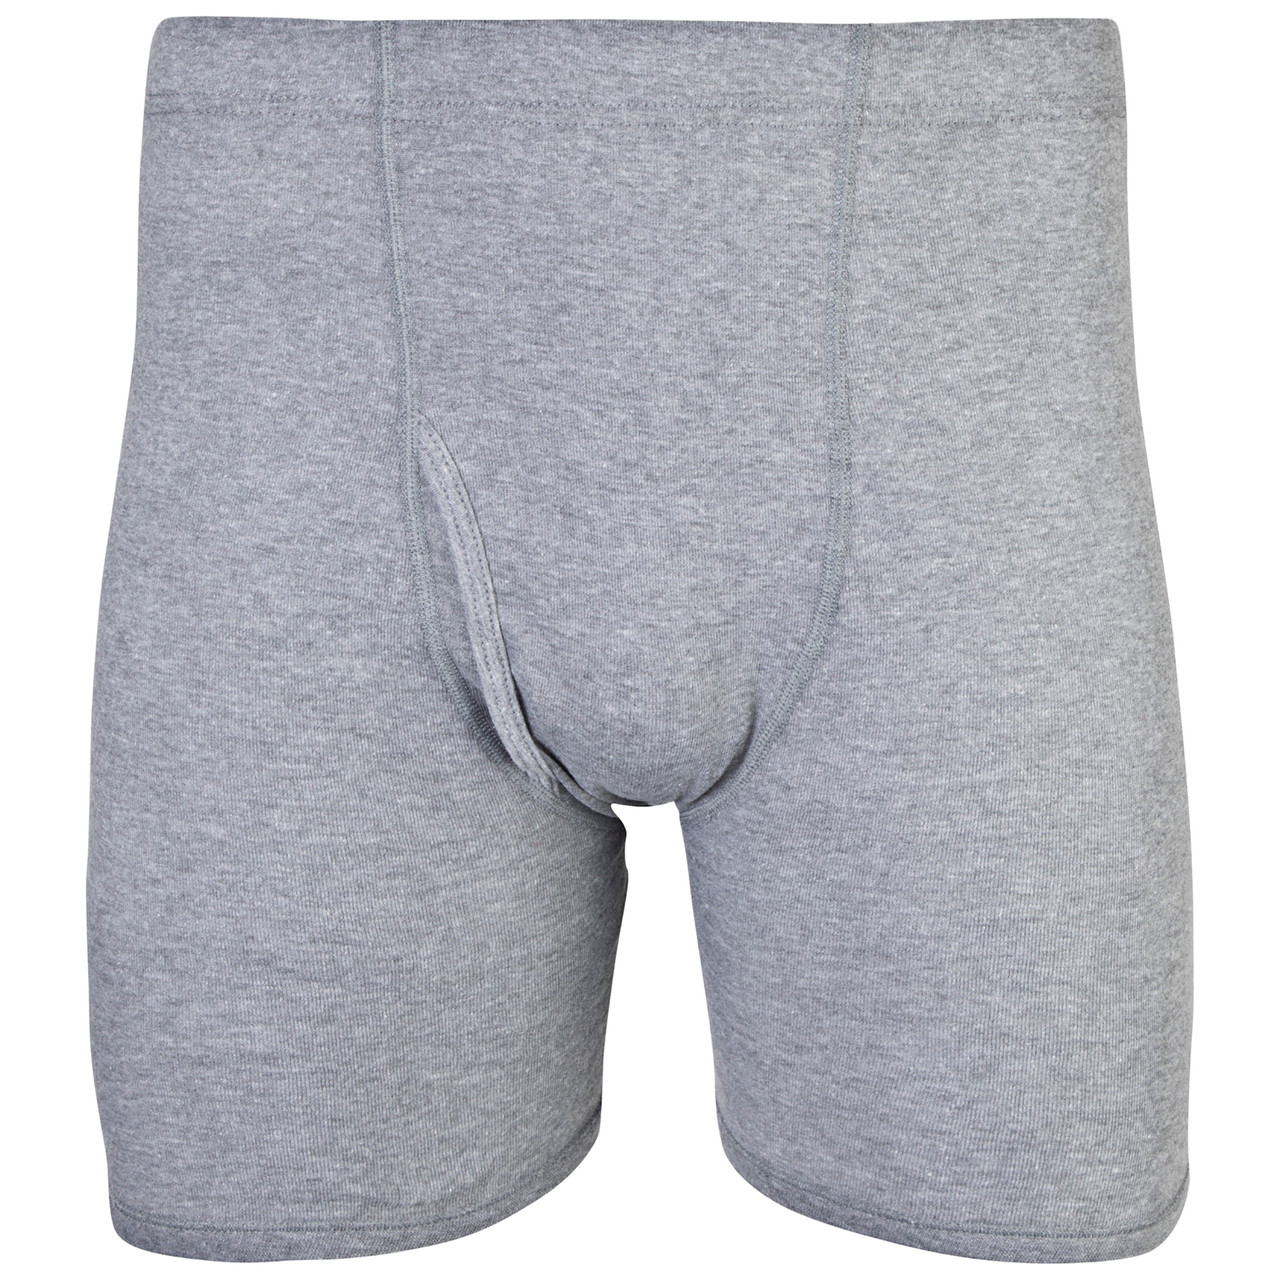 Men's Covered Waistband Boxer Brief